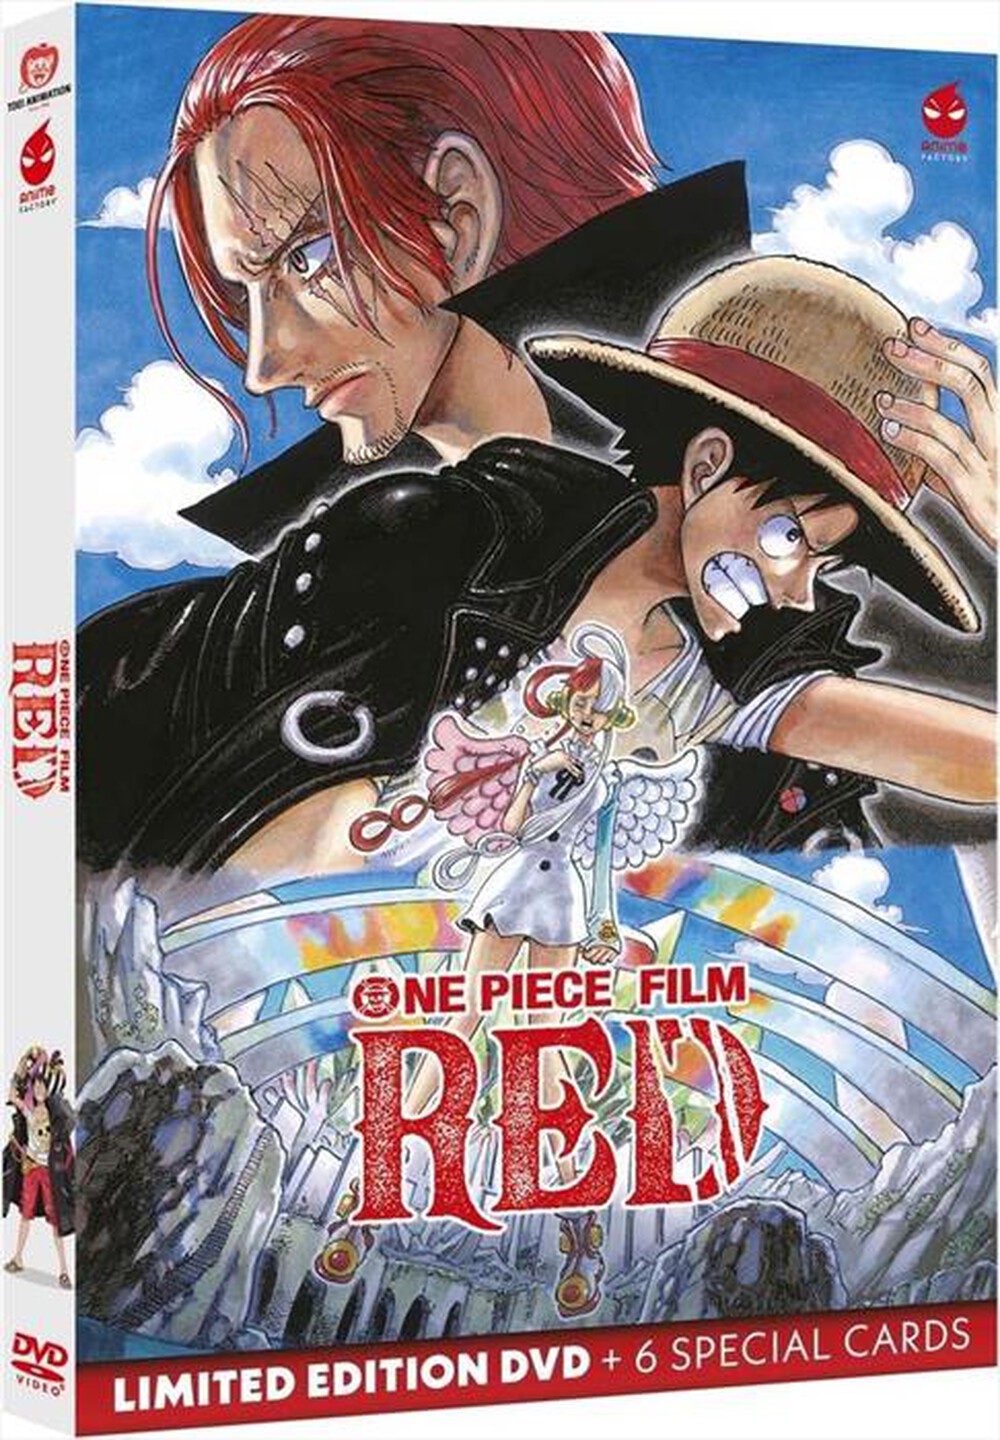 "Anime Factory - One Piece Film: Red"